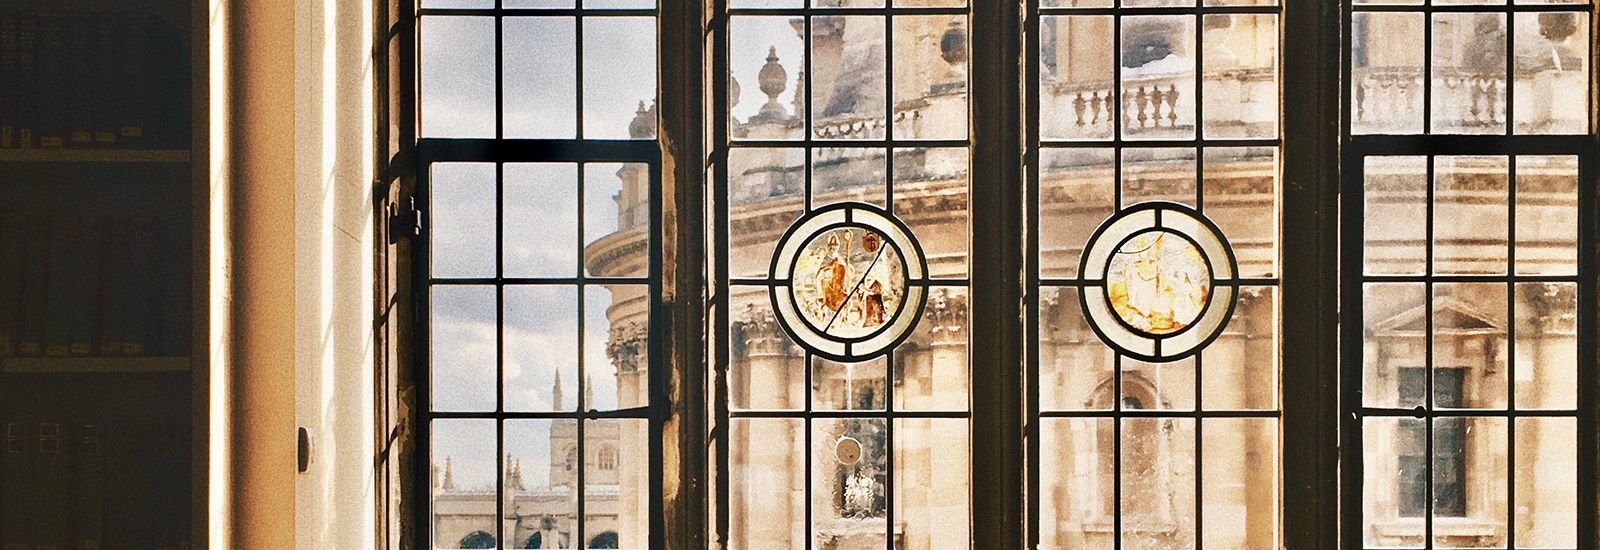 View of the Radcliffe Camera through a window